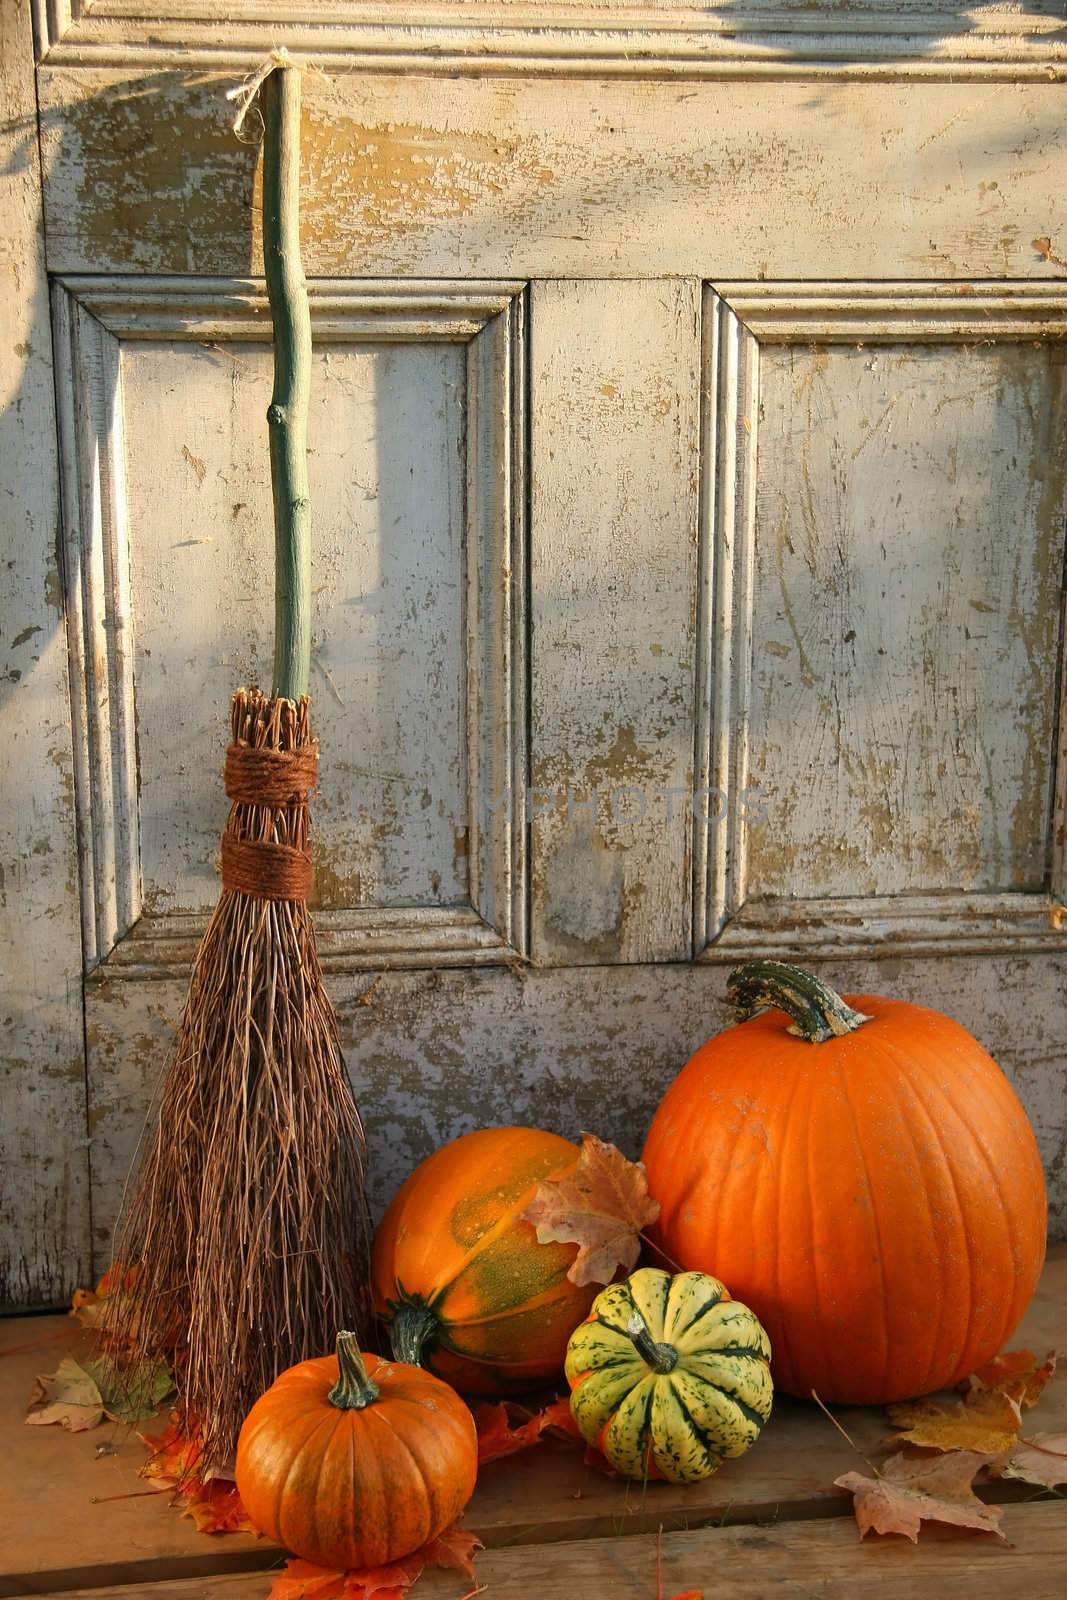 Pumpkin and gourds with old broom at the door by Sandralise